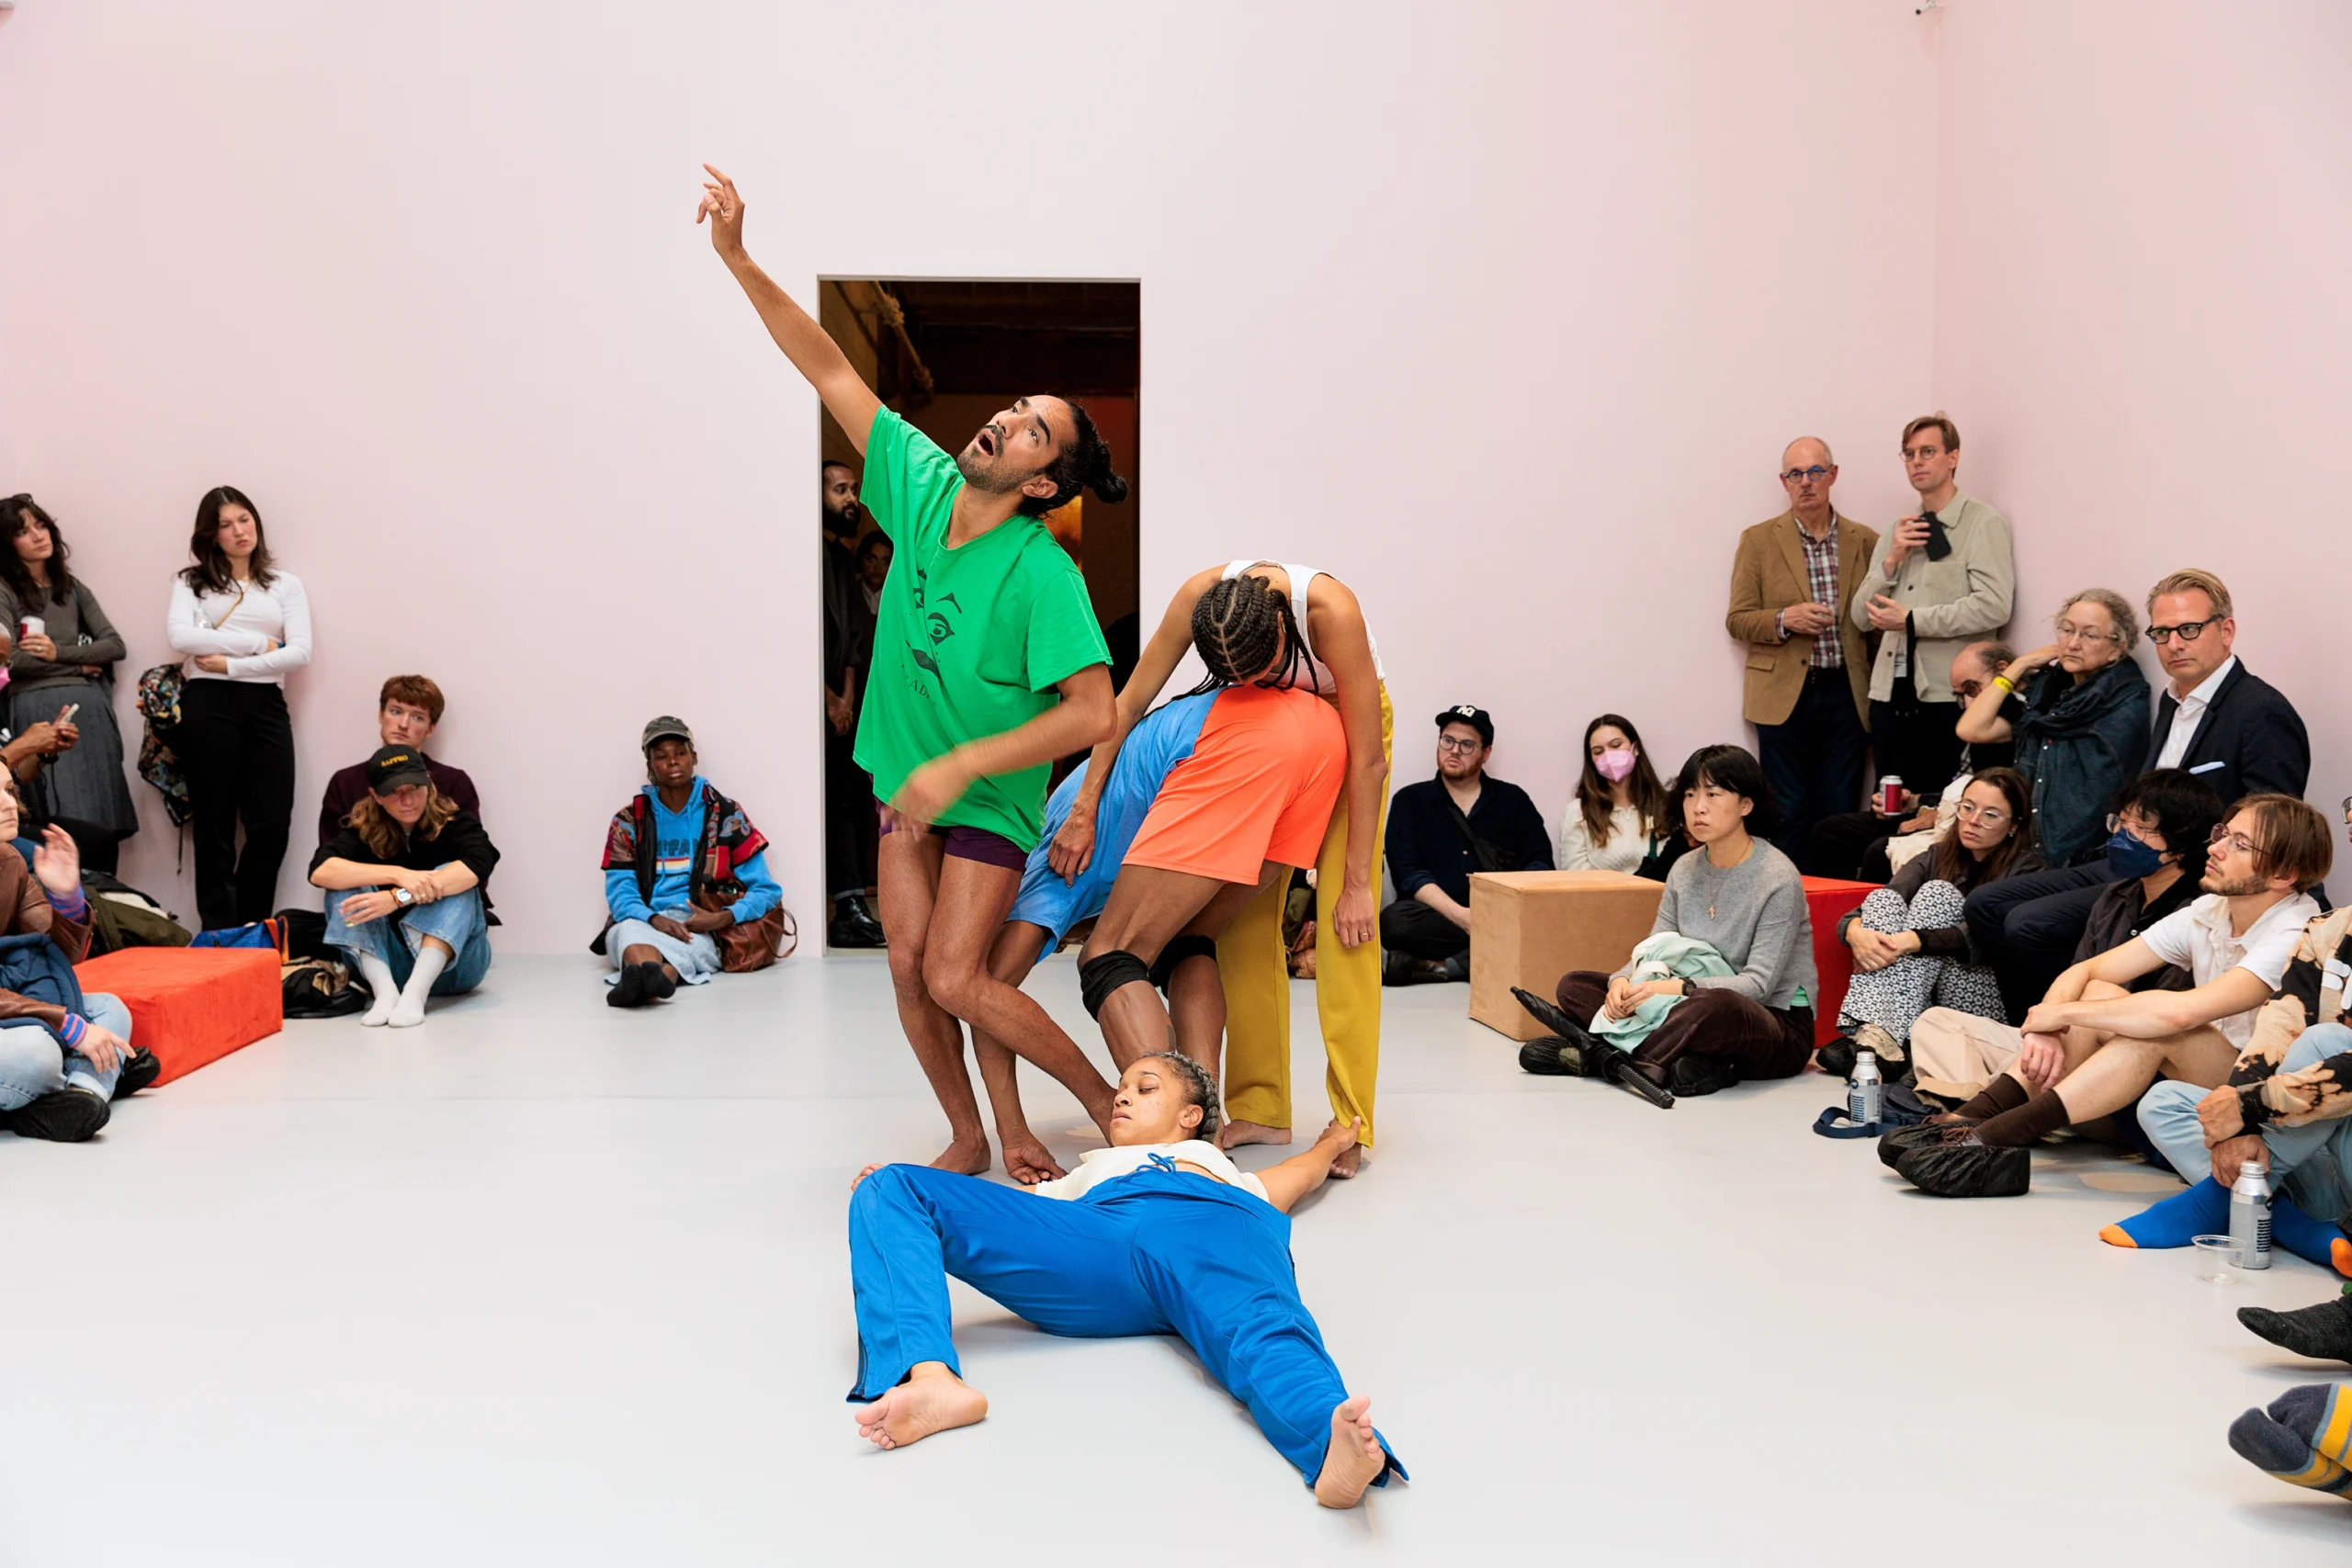 A cluster of four Black dancers costumed in bright colors perform in a white room. One reaches to a corner as their mouth opens in a cry. Another lies on their back, one knee pulled toward their waist. A third bends forward to touch their forehead to another's lower back. Audience members sit and stand around the edges of the space.